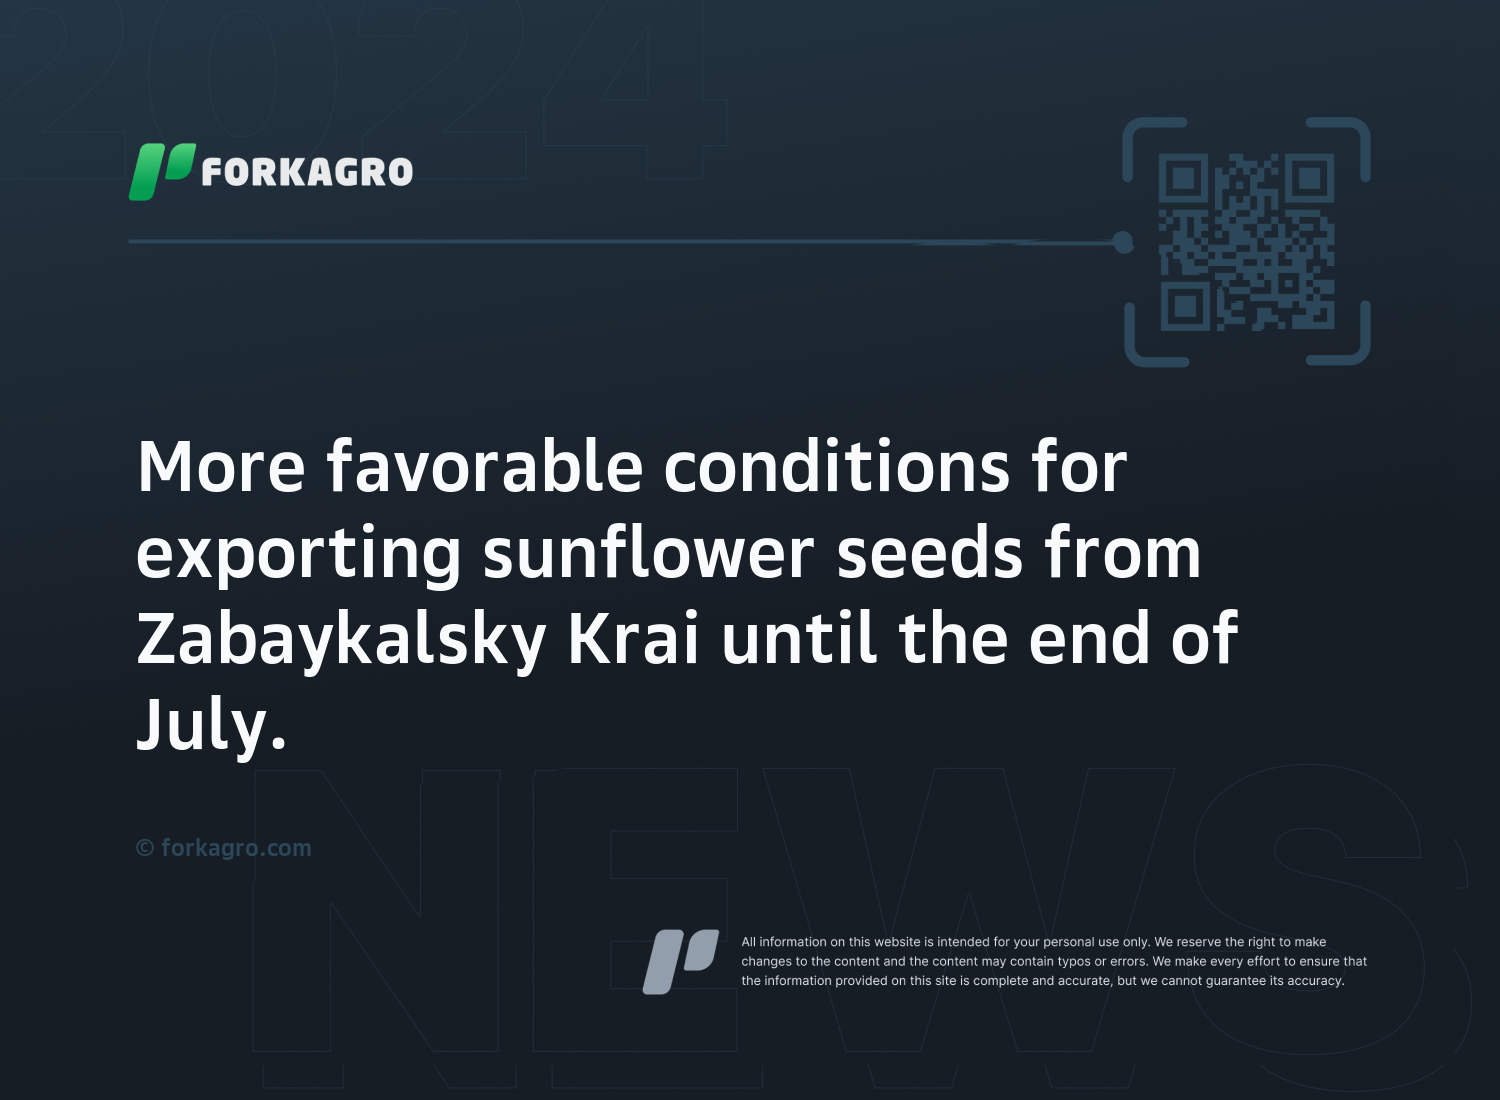 More favorable conditions for exporting sunflower seeds from Zabaykalsky Krai until the end of July.